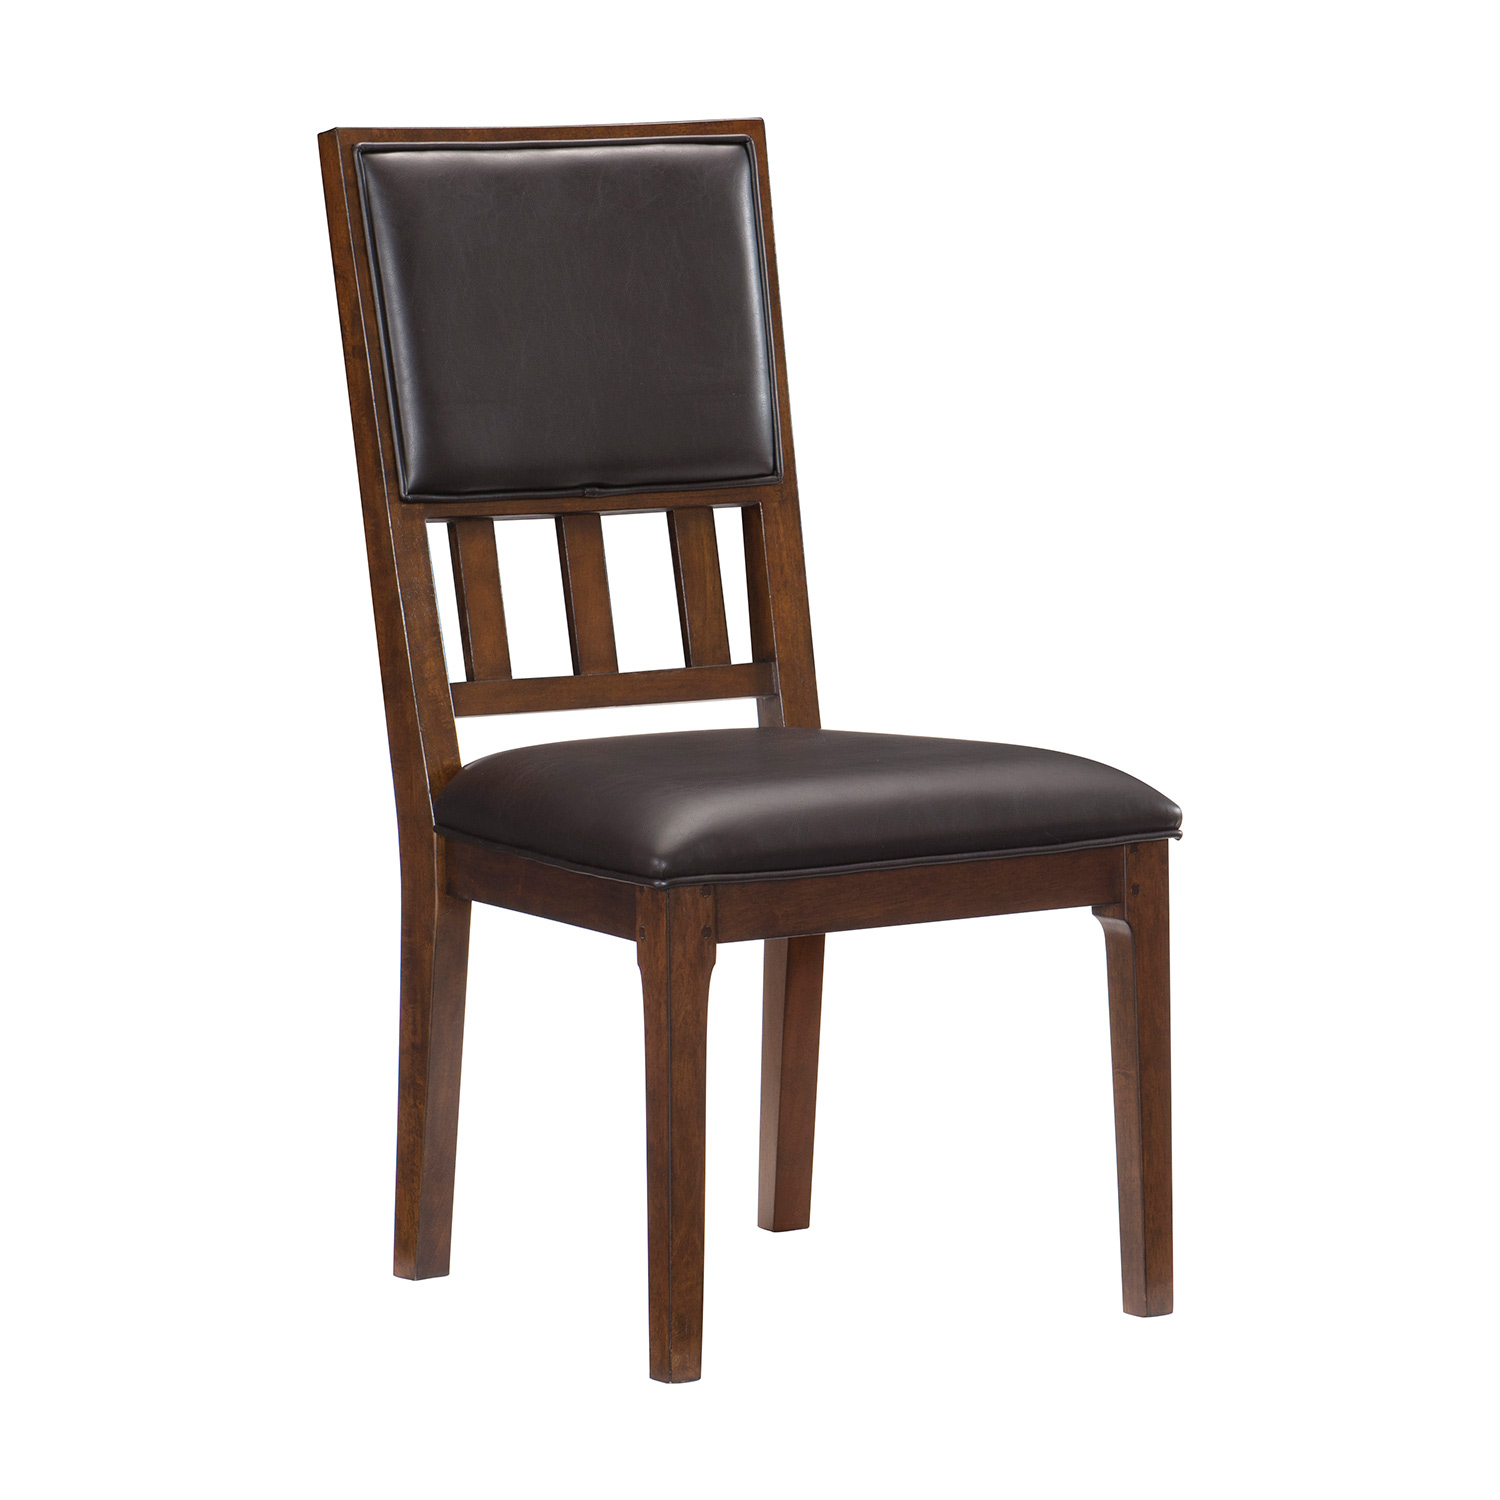 Homelegance Frazier Side Chair - Brown Cherry